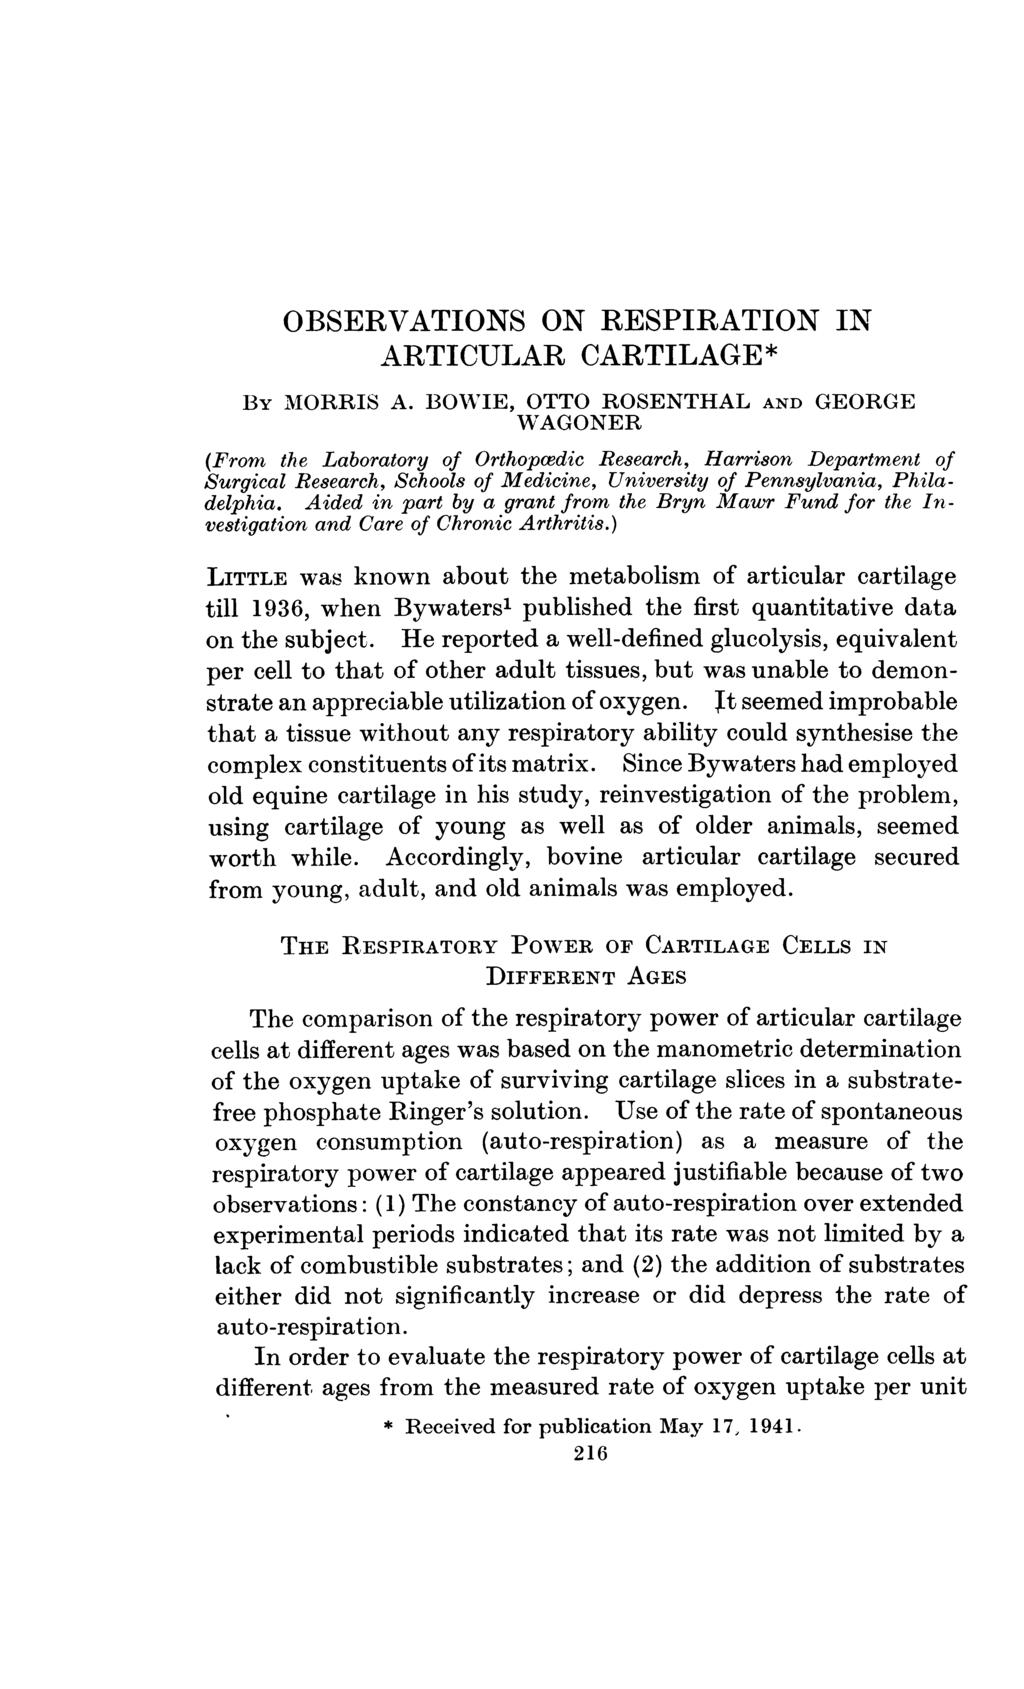 OBSERVATIONS ON RESPIRATION IN ARTICULAR CARTILAGE * By MORRIS A.